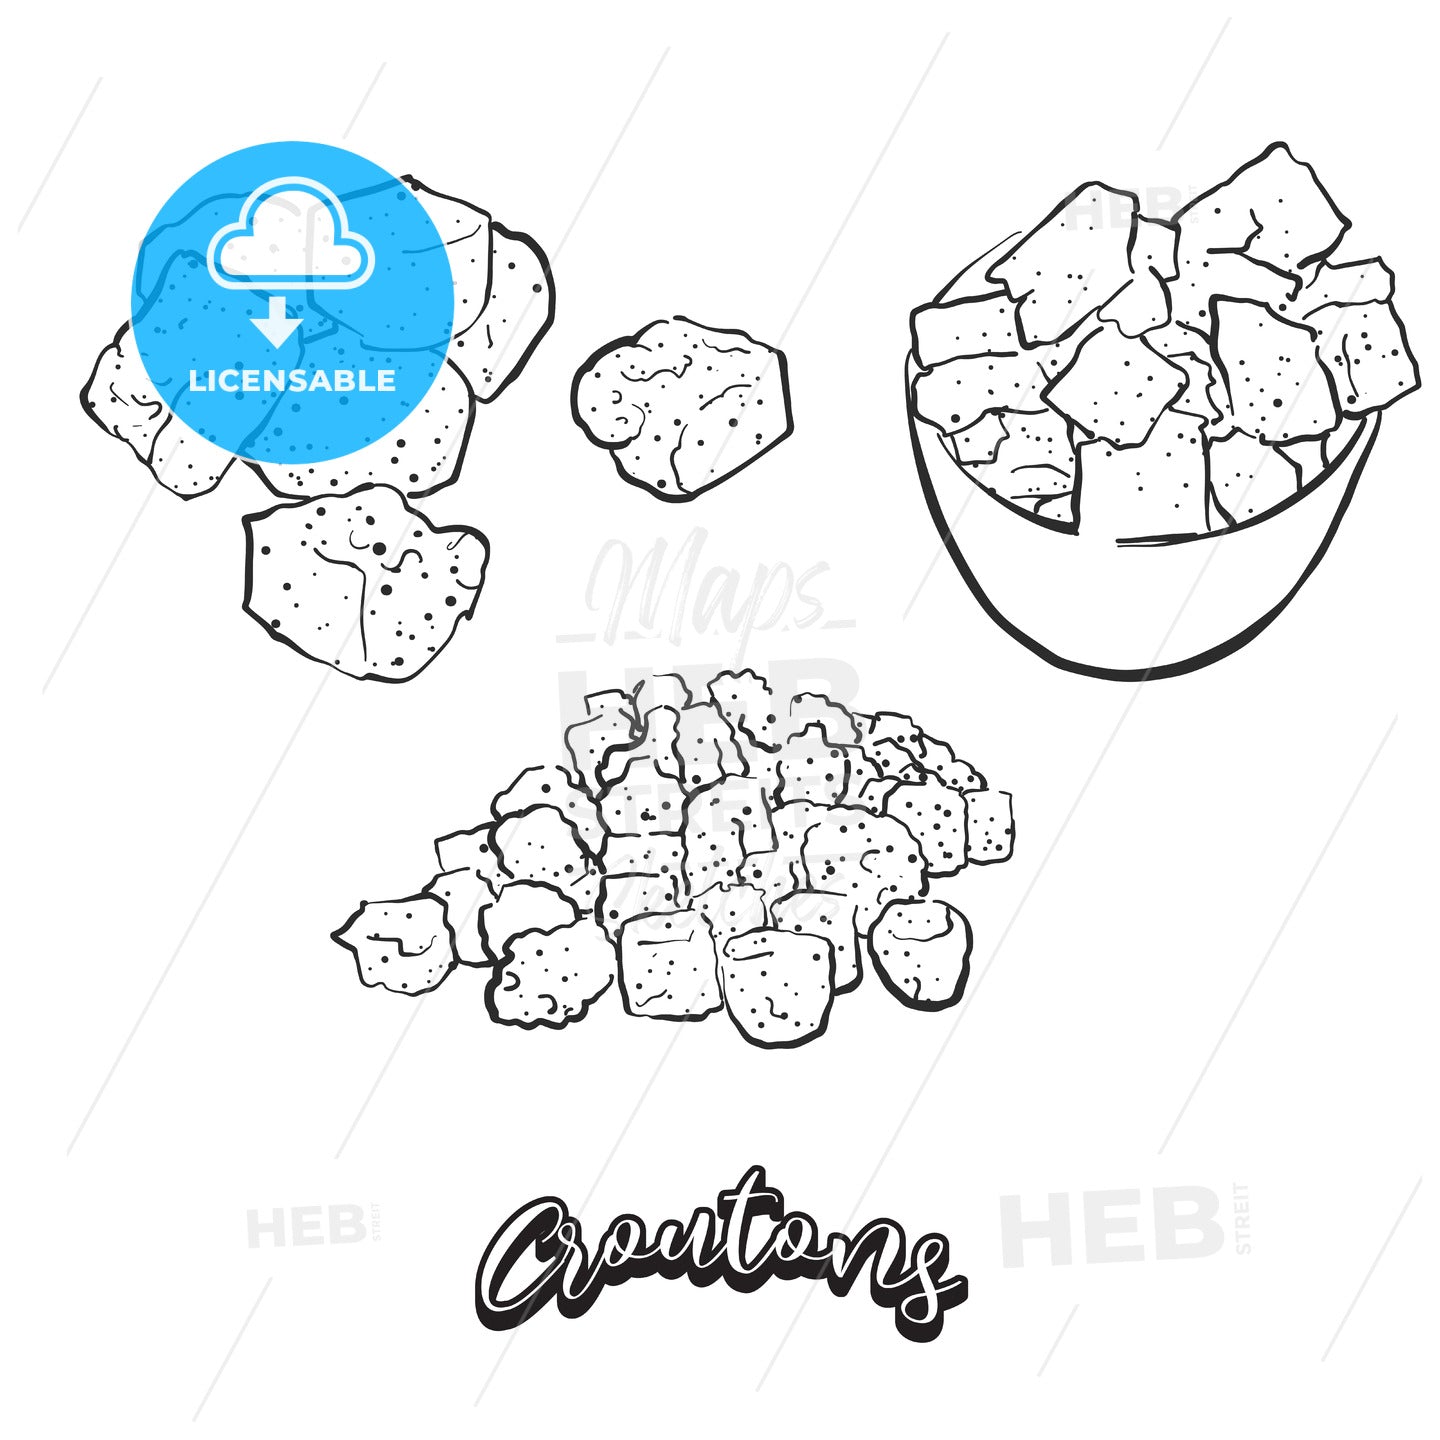 Hand drawn sketch of Croutons bread – instant download